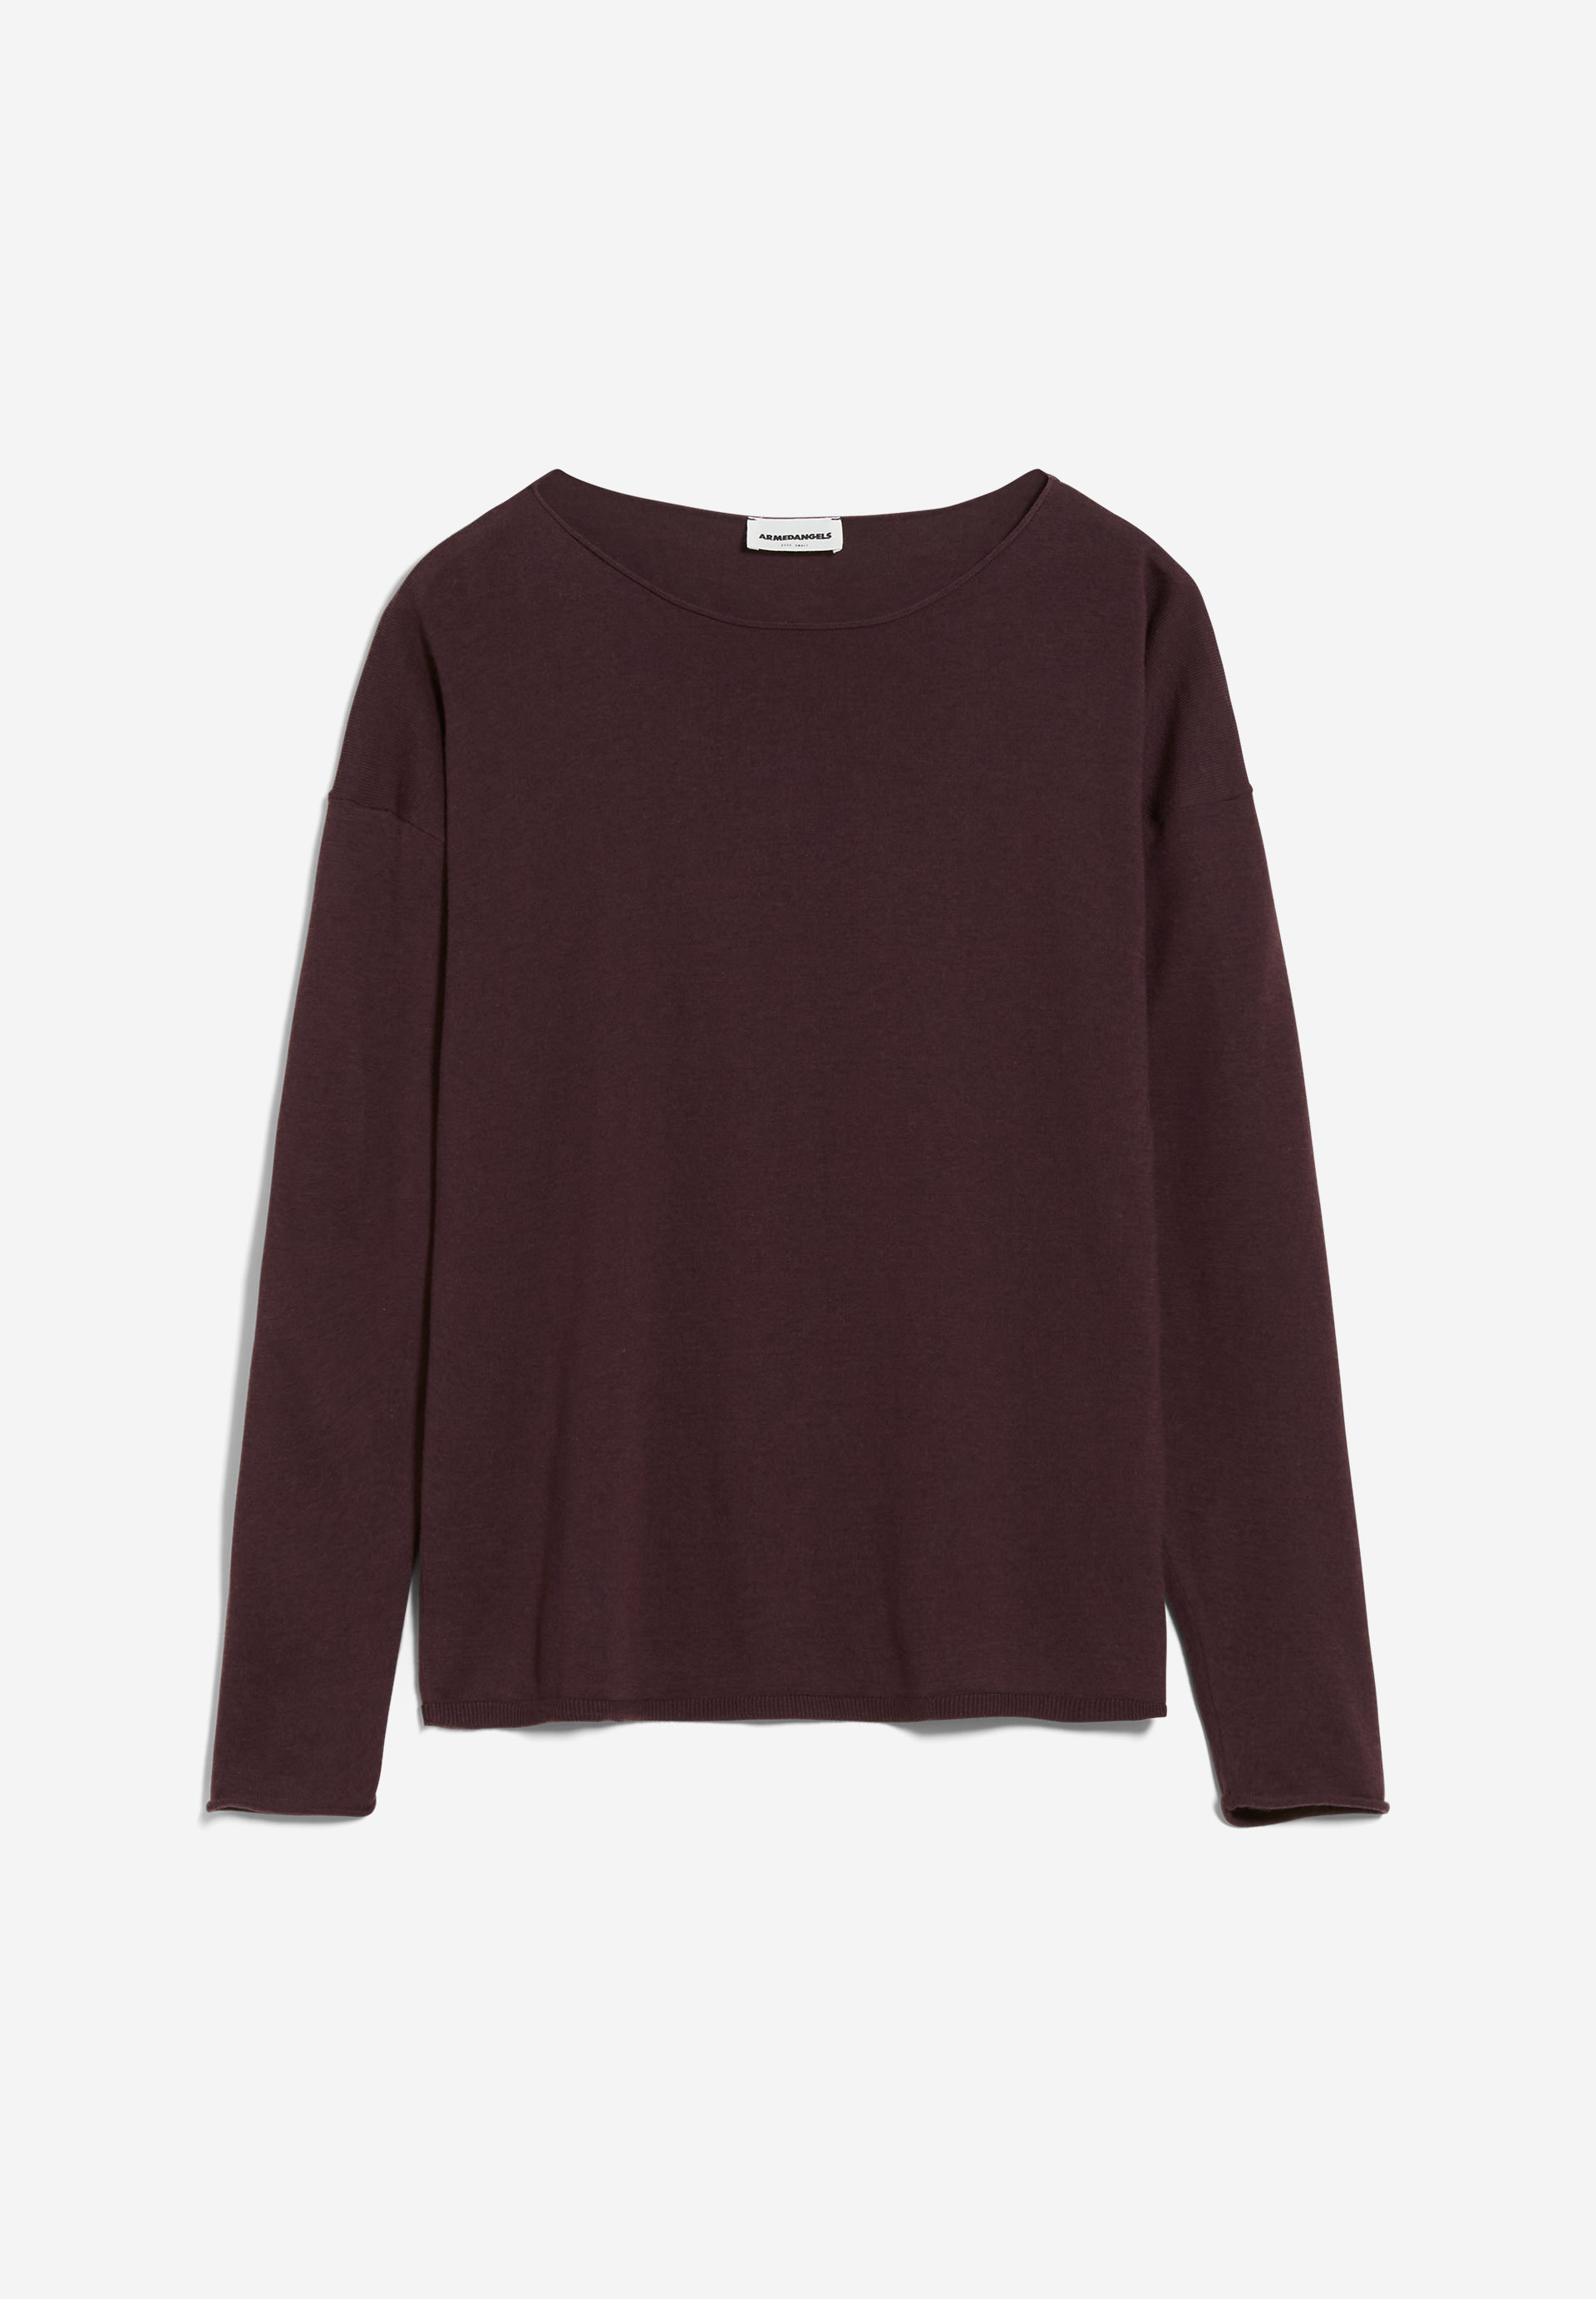 LADAA Knit Sweater Relaxed Fit made of TENCEL™ Lyocell Mix